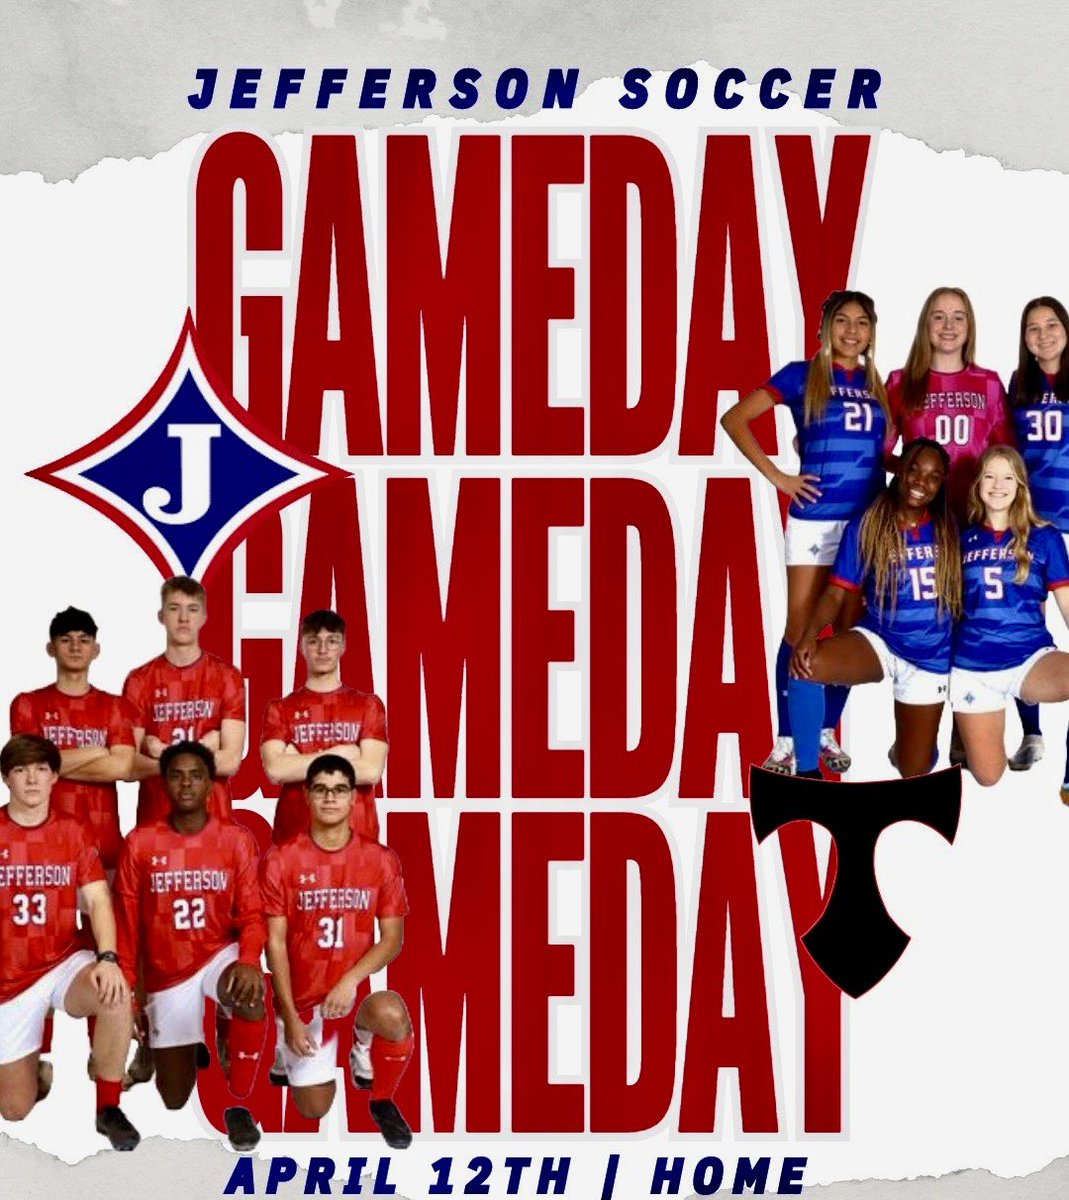 VARSITY GAMEDAY! Last regular season home game! Alliance & Jefferson Rec players get in free with their jersey! ⏰ 6pm girls, 8pm boys 📍 Jefferson Memorial Turf 🆚 North Oconee HS Go Dragons!